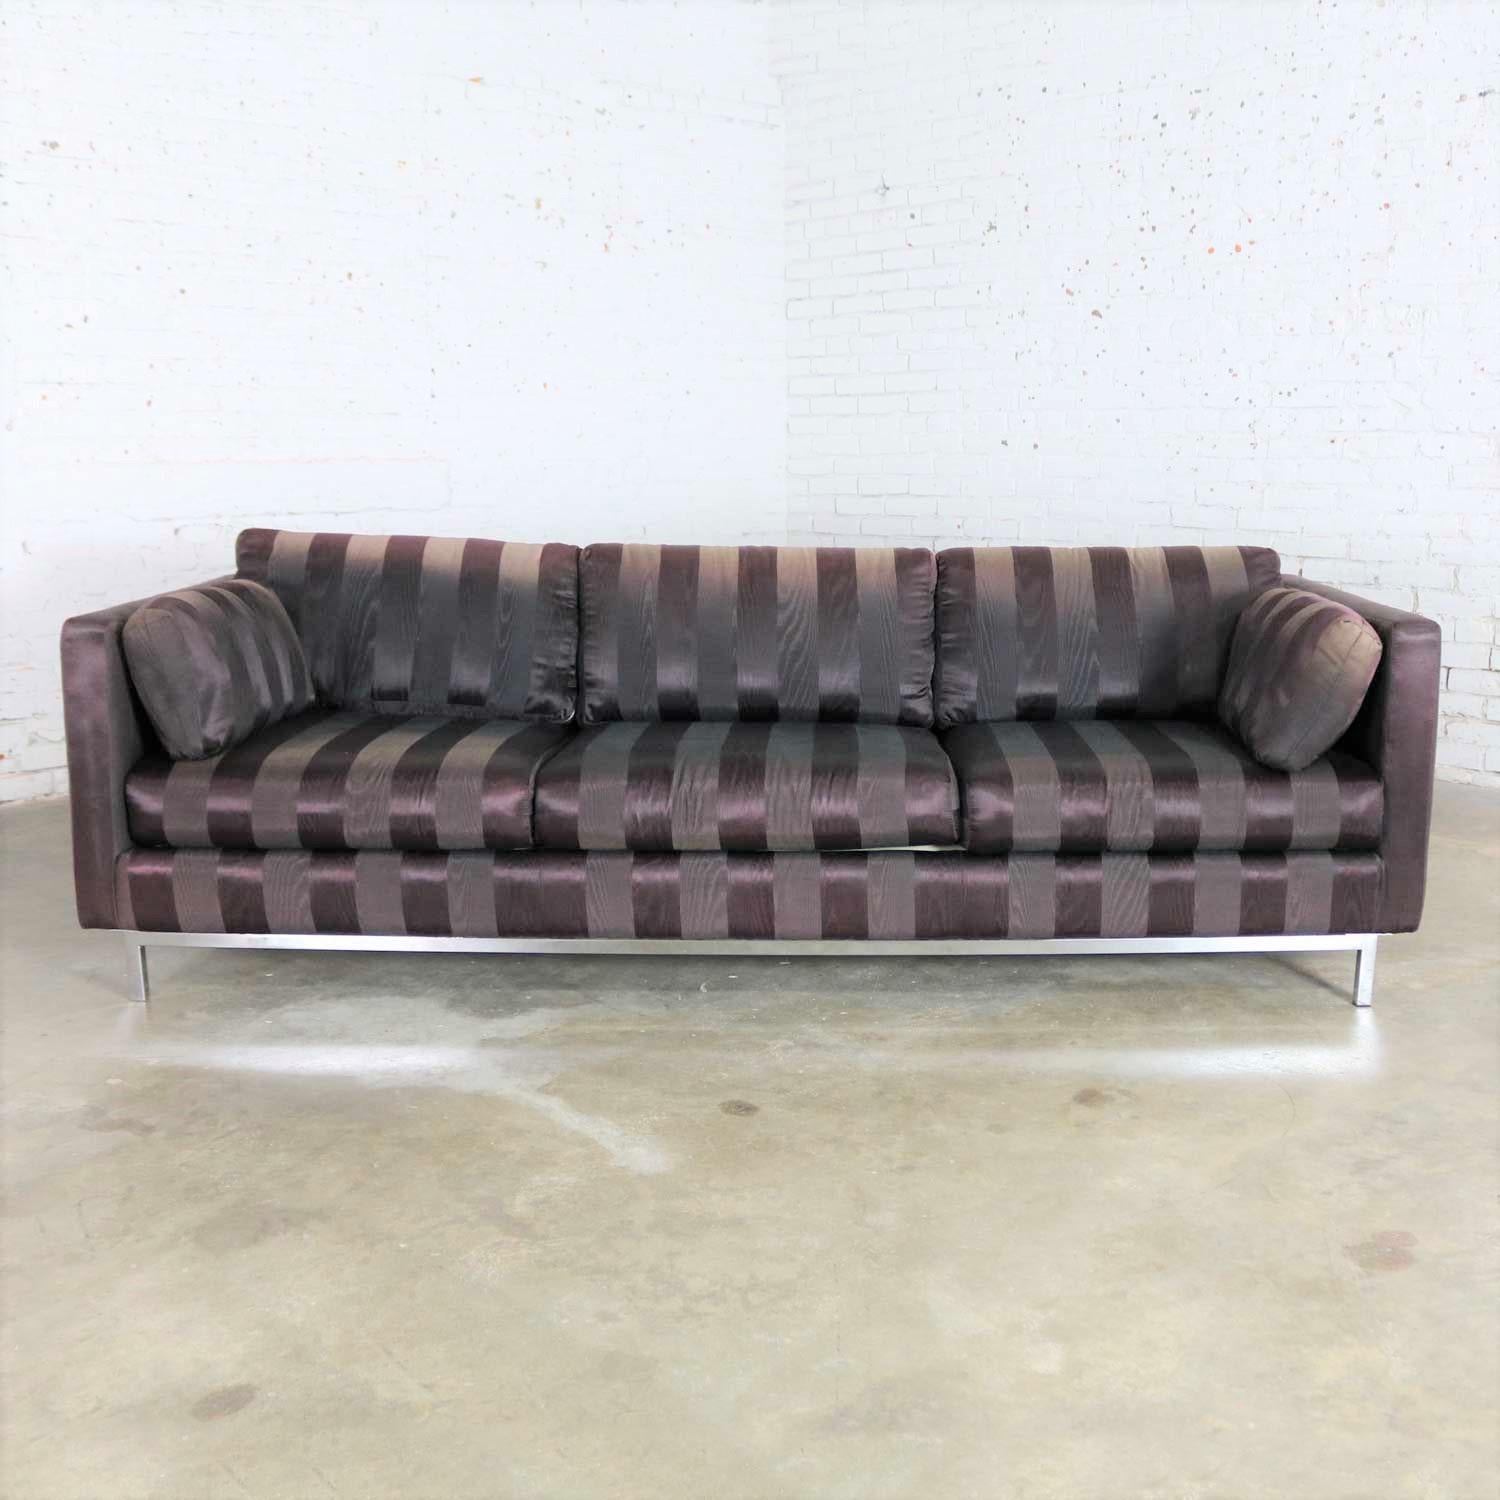 Handsome Mid-Century Modern tuxedo cube sofa with chrome legs in the style of Florence Knoll or Milo Baughman. The chrome legs and the frame are in fabulous vintage condition. Then there is the fabric. I’m told it was originally black satin. It has